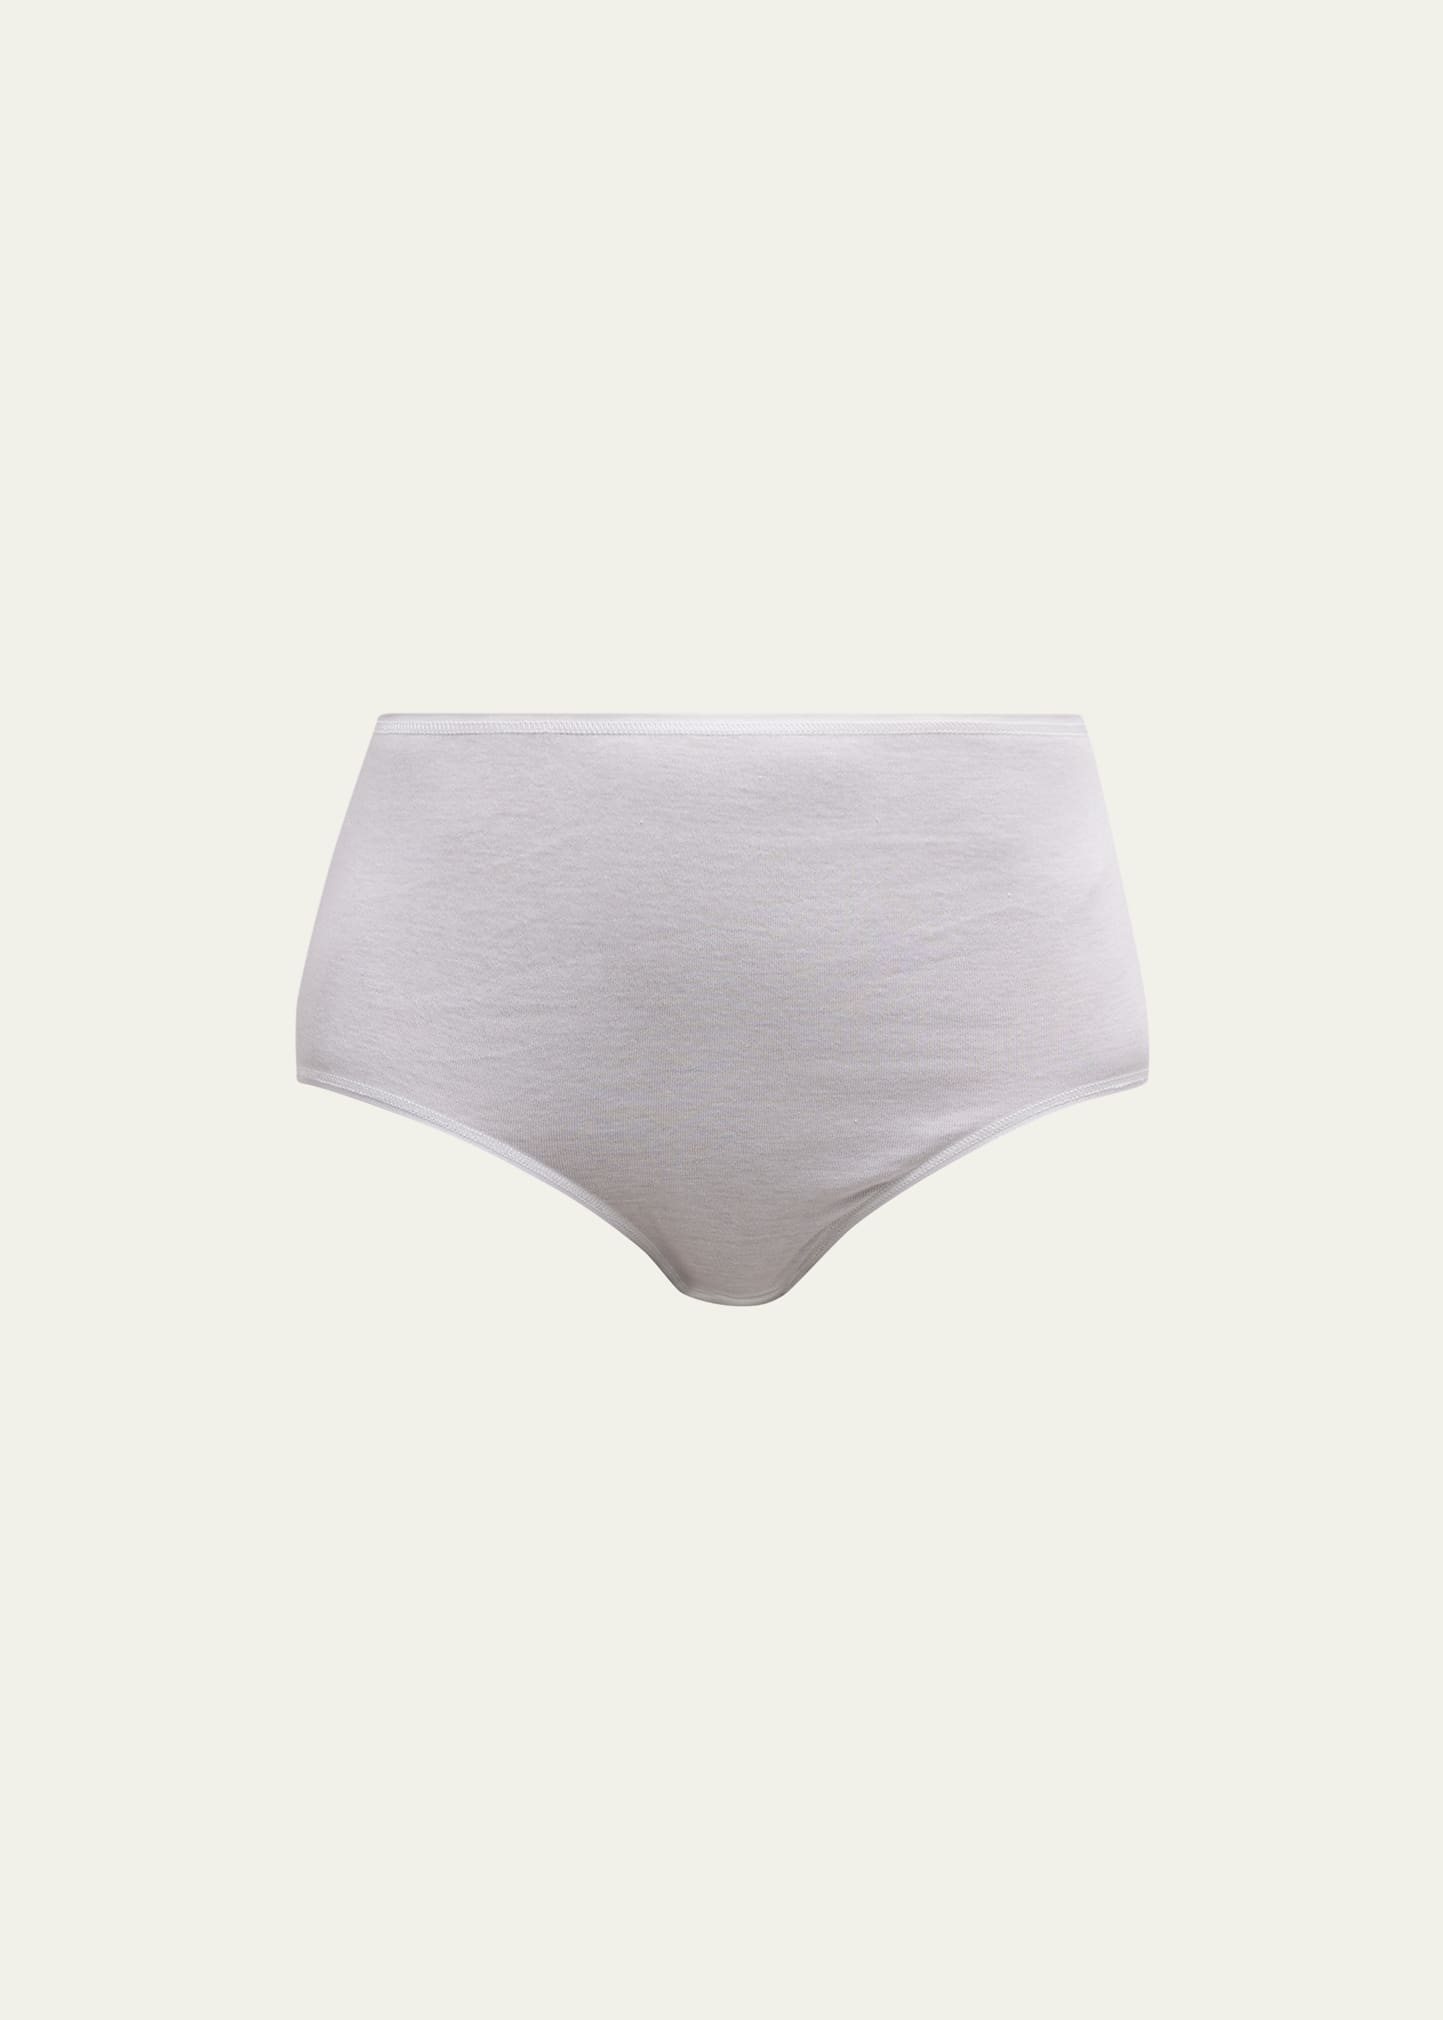 Midi Brief in colour pigeon from the Cotton Seamless collection